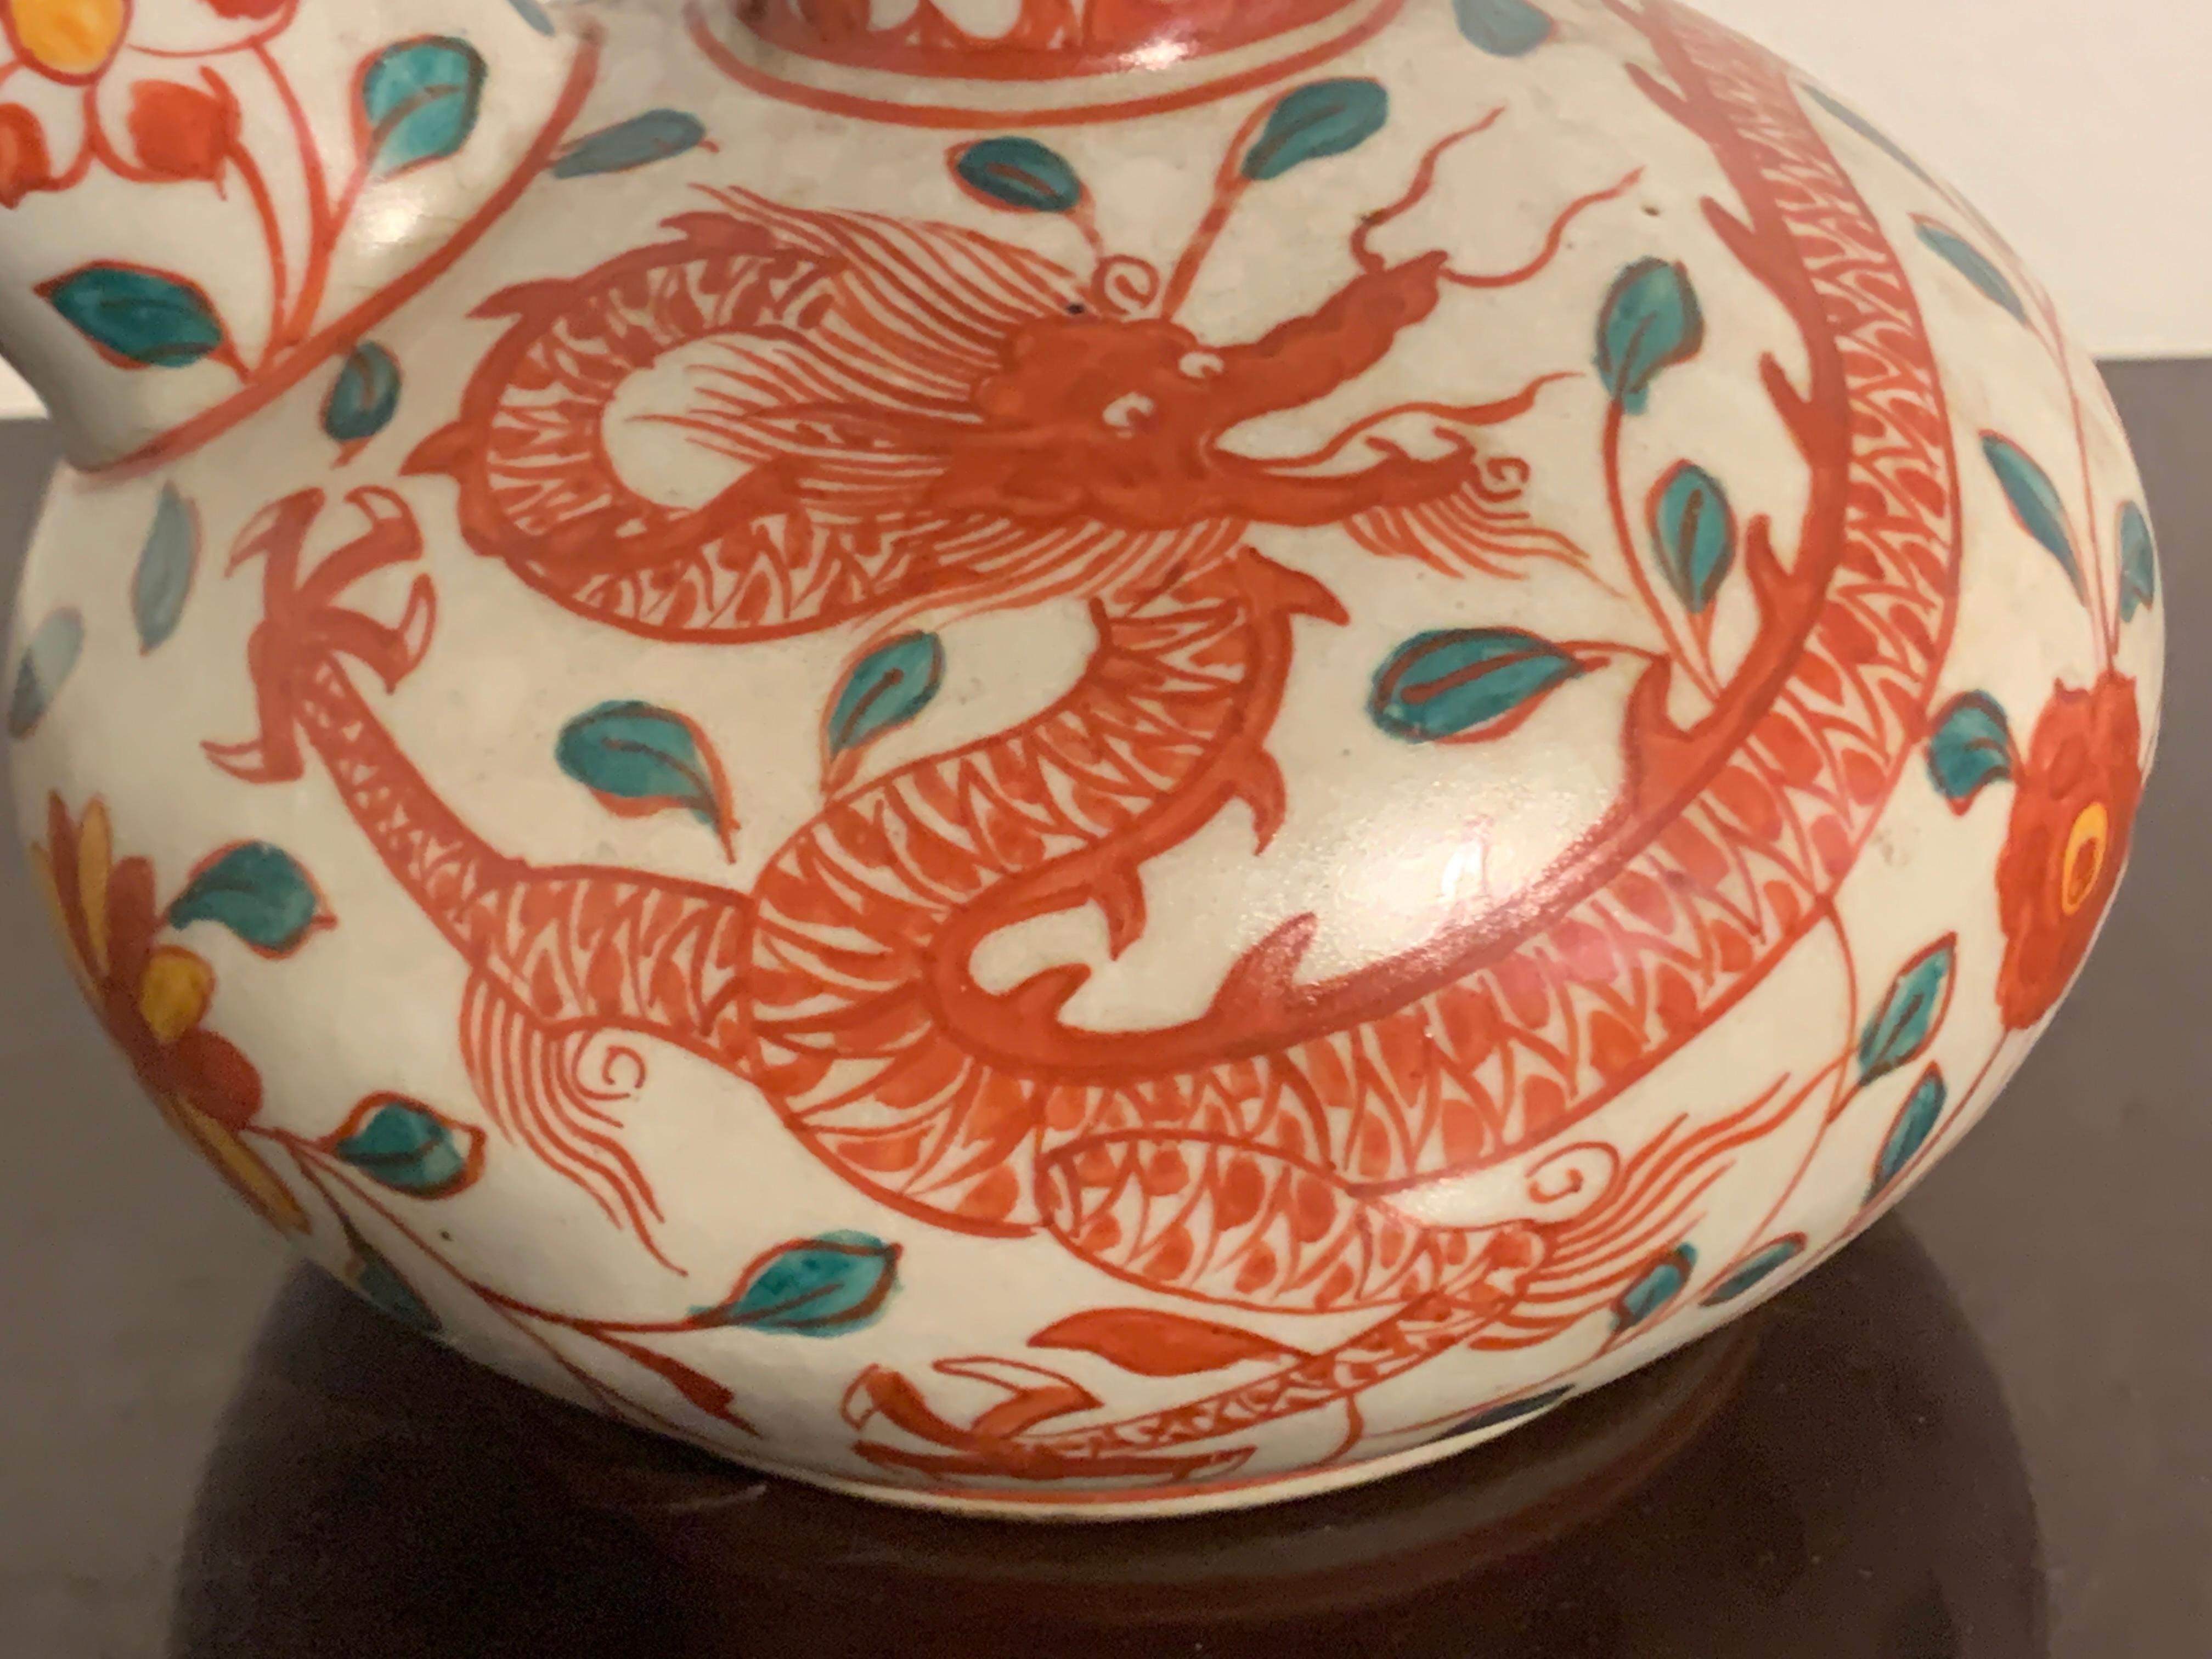 Chinese Export Kendi, Swatow Ware, Porcelain with Polychrome Enamels, circa 1900 In Good Condition For Sale In Austin, TX